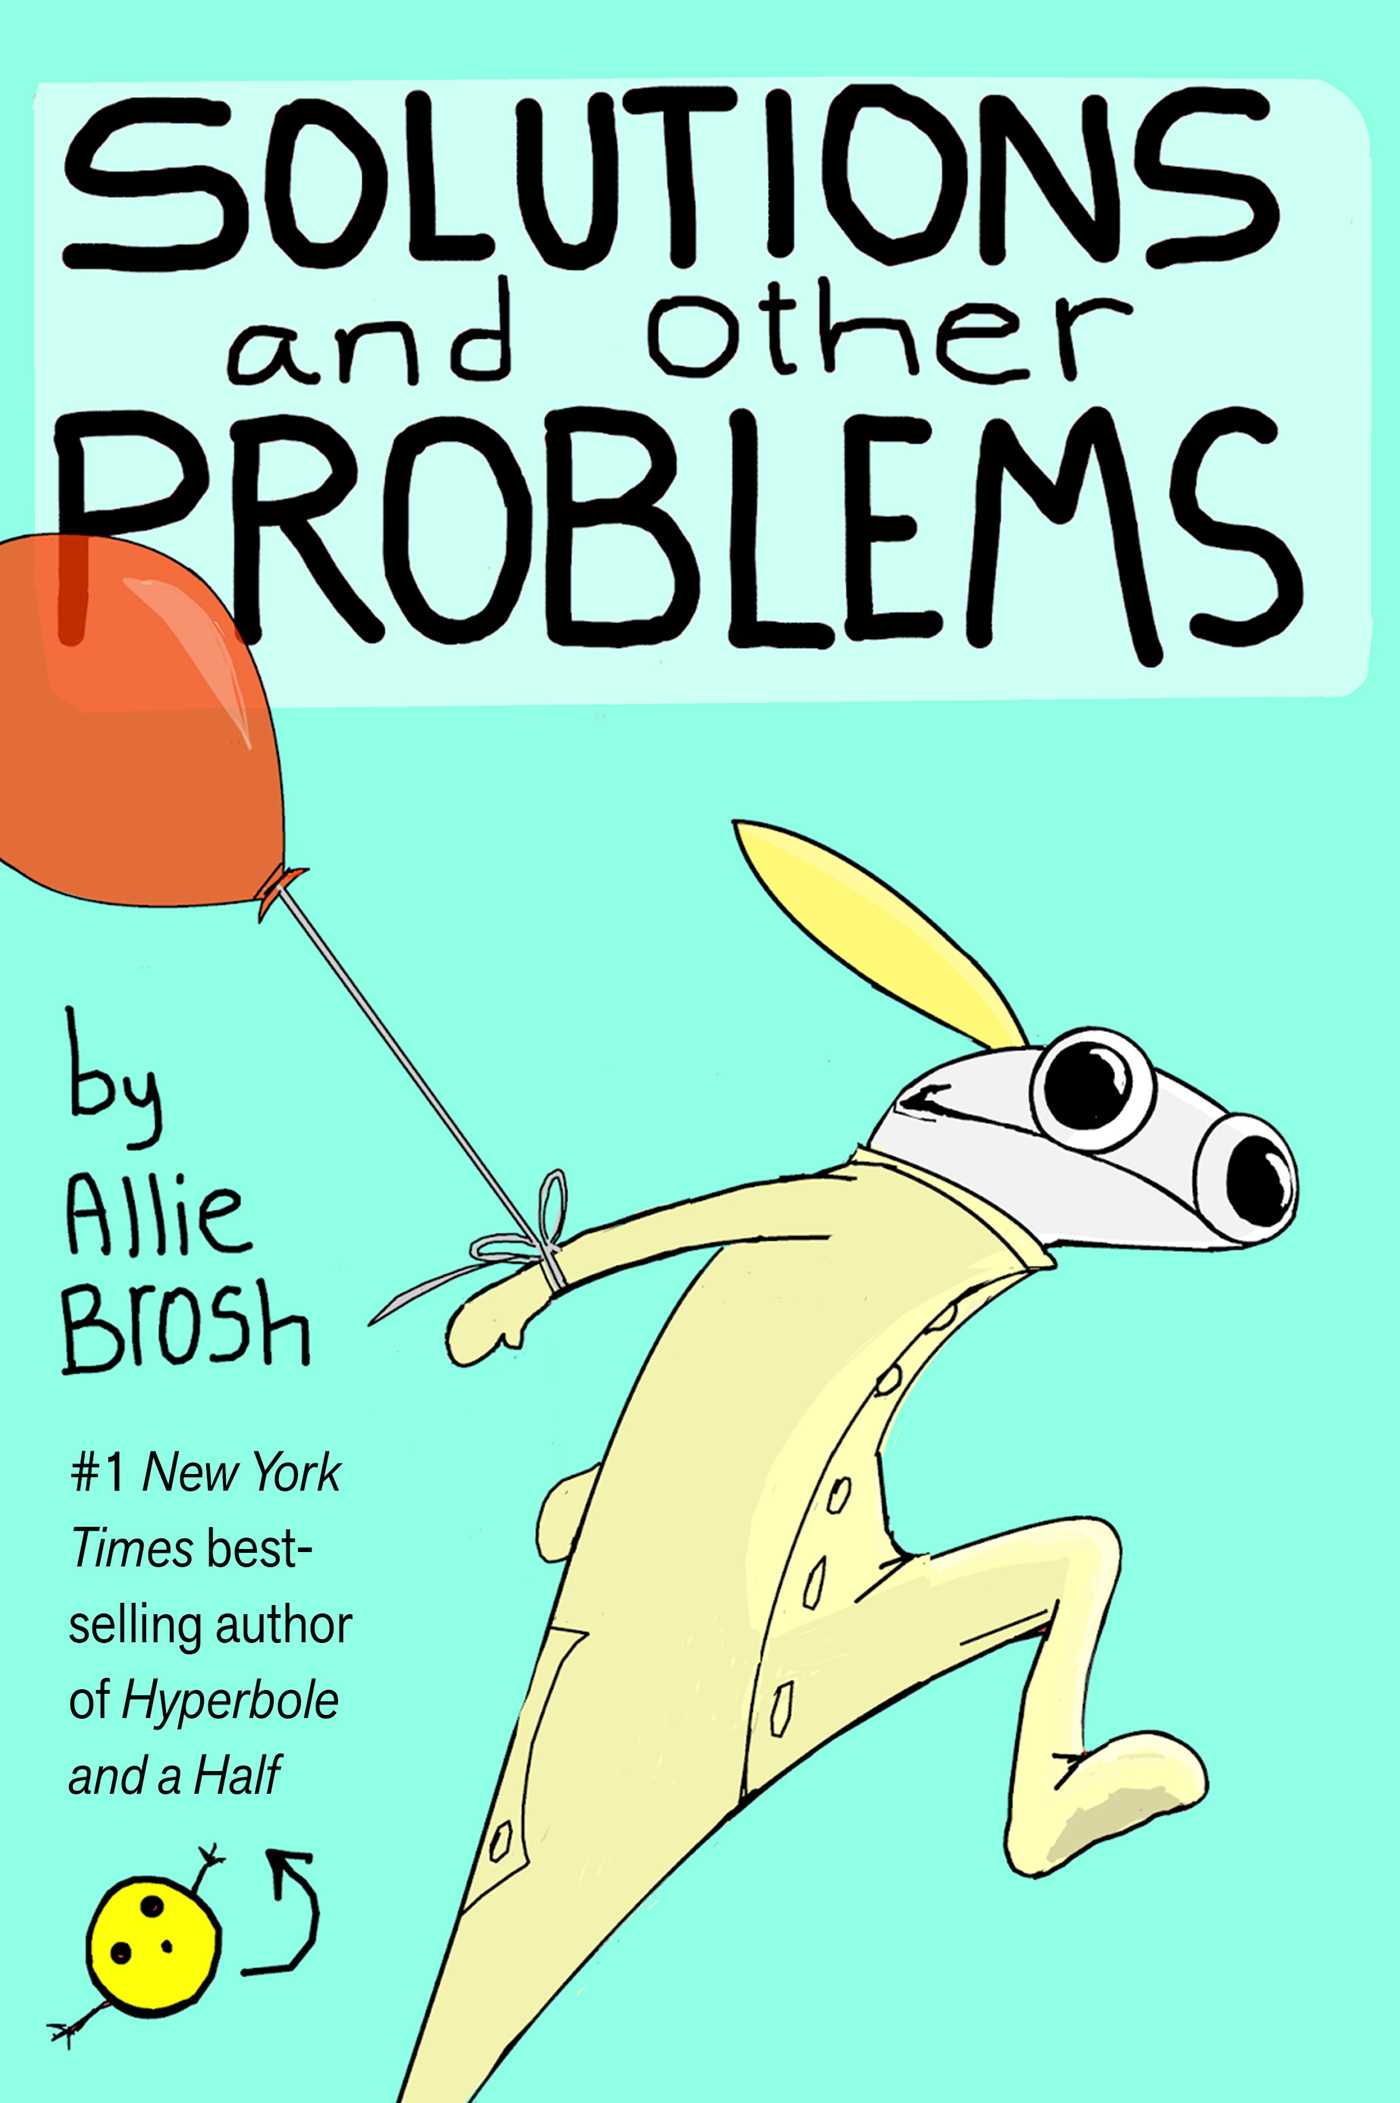 [EPUB] Solutions and Other Problems by Allie Brosh